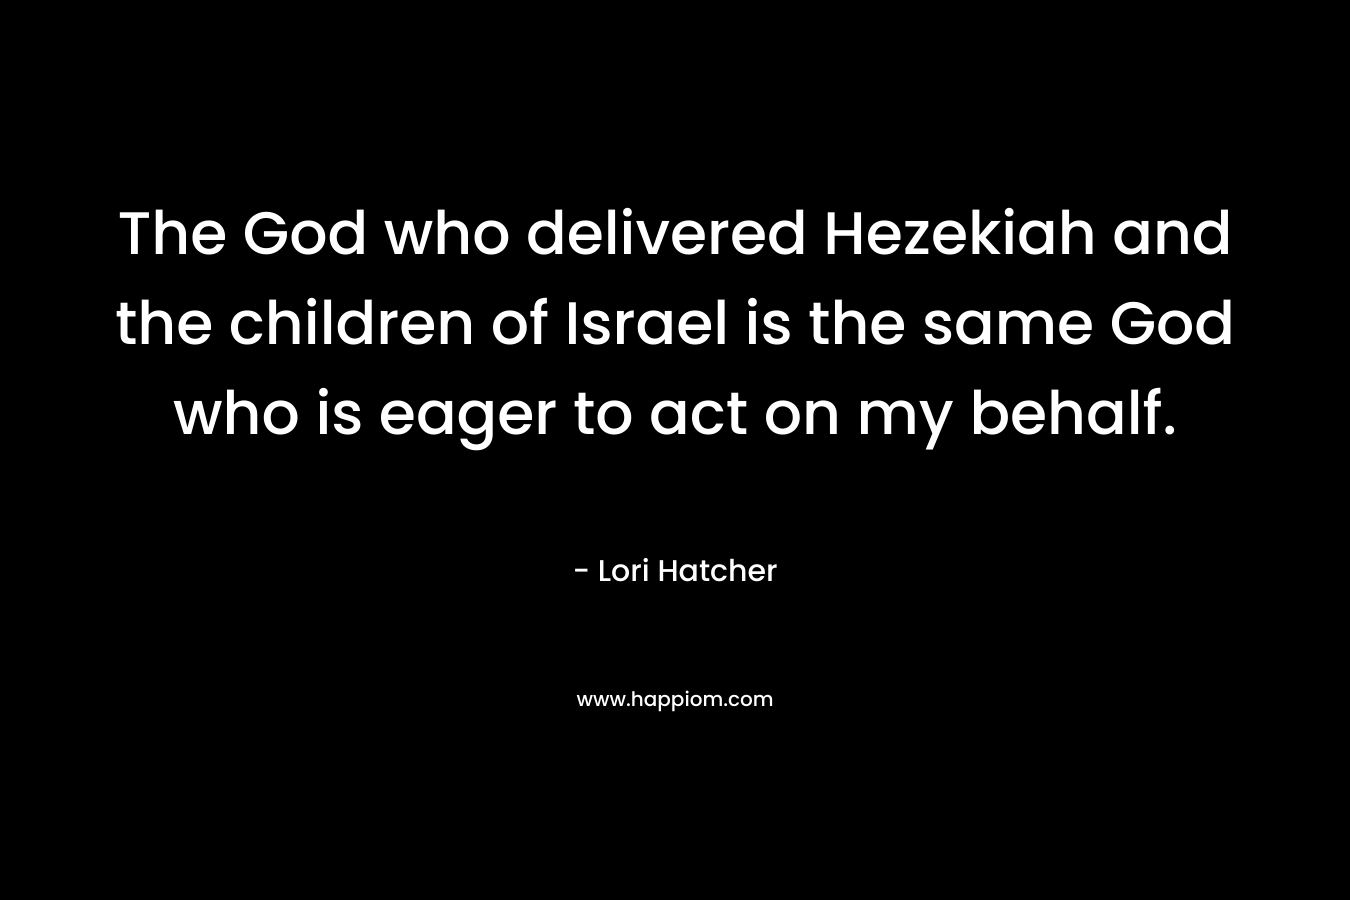 The God who delivered Hezekiah and the children of Israel is the same God who is eager to act on my behalf.